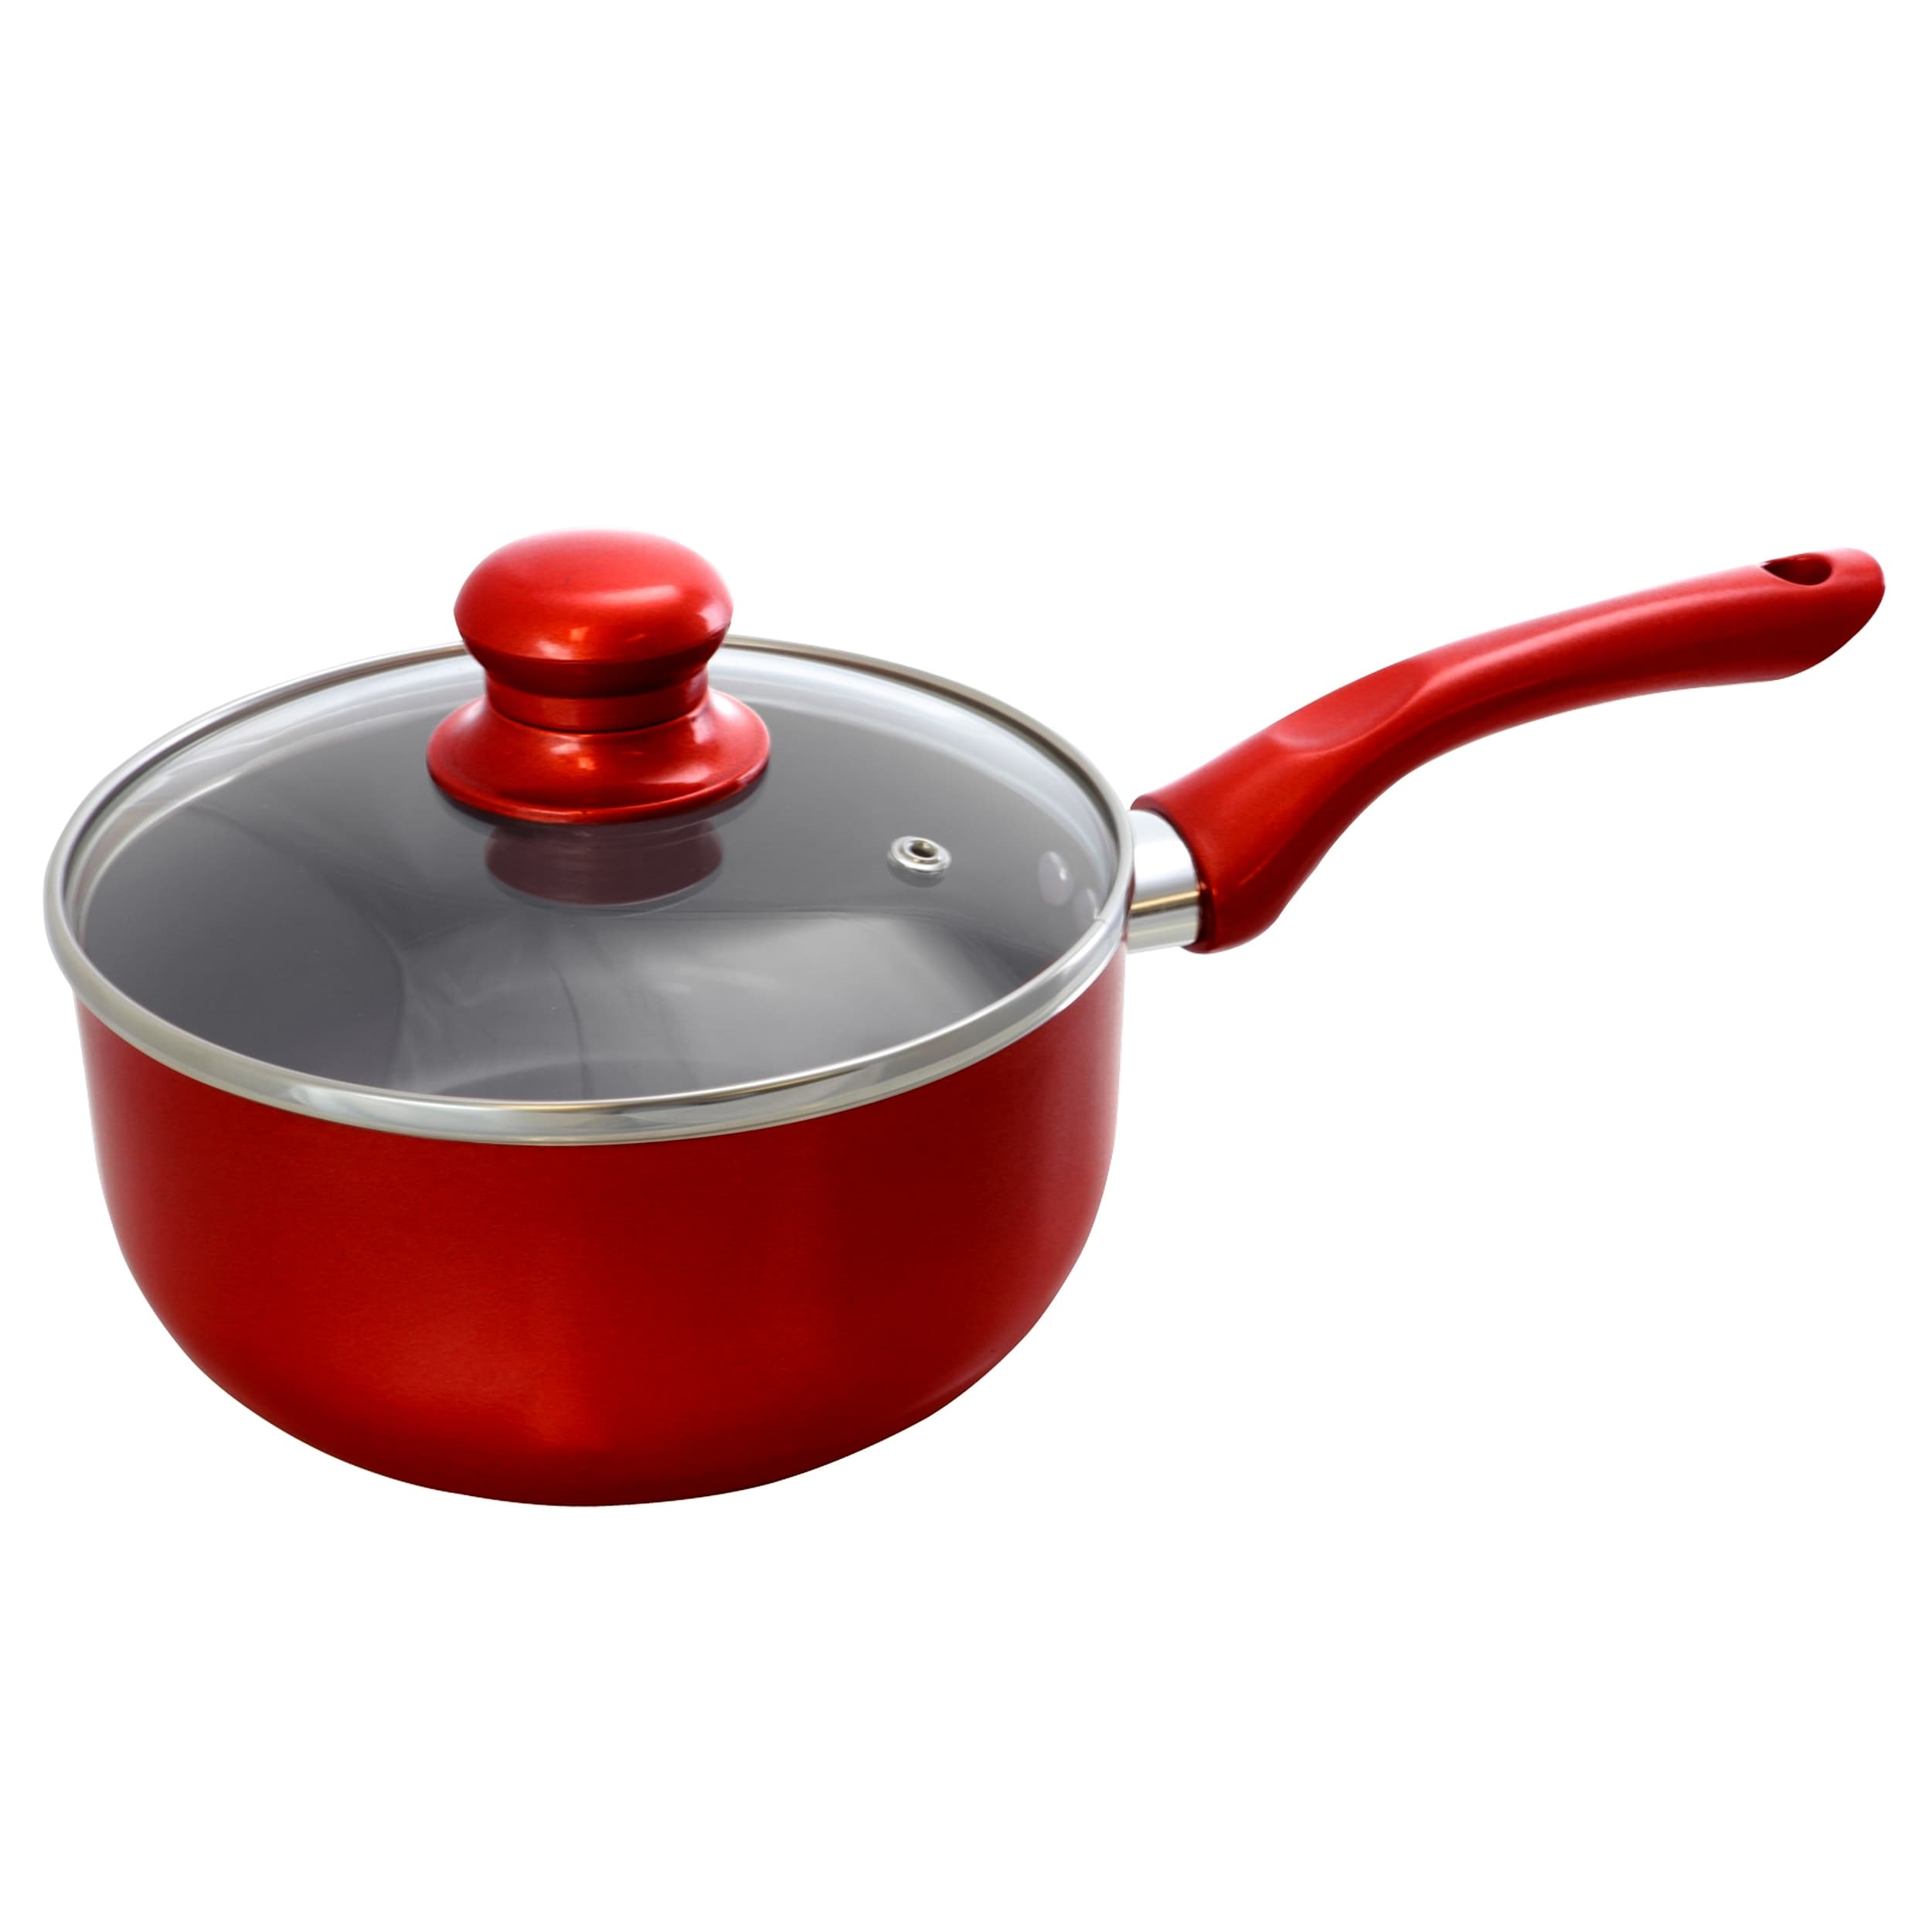 https://ak1.ostkcdn.com/images/products/is/images/direct/7b465f2155c9041bc5645e73dcfc556d33215189/Better-Chef-1.5-Quart-Ceramic-Coated-Saucepan-in-Red-with-Glass-Lid.jpg